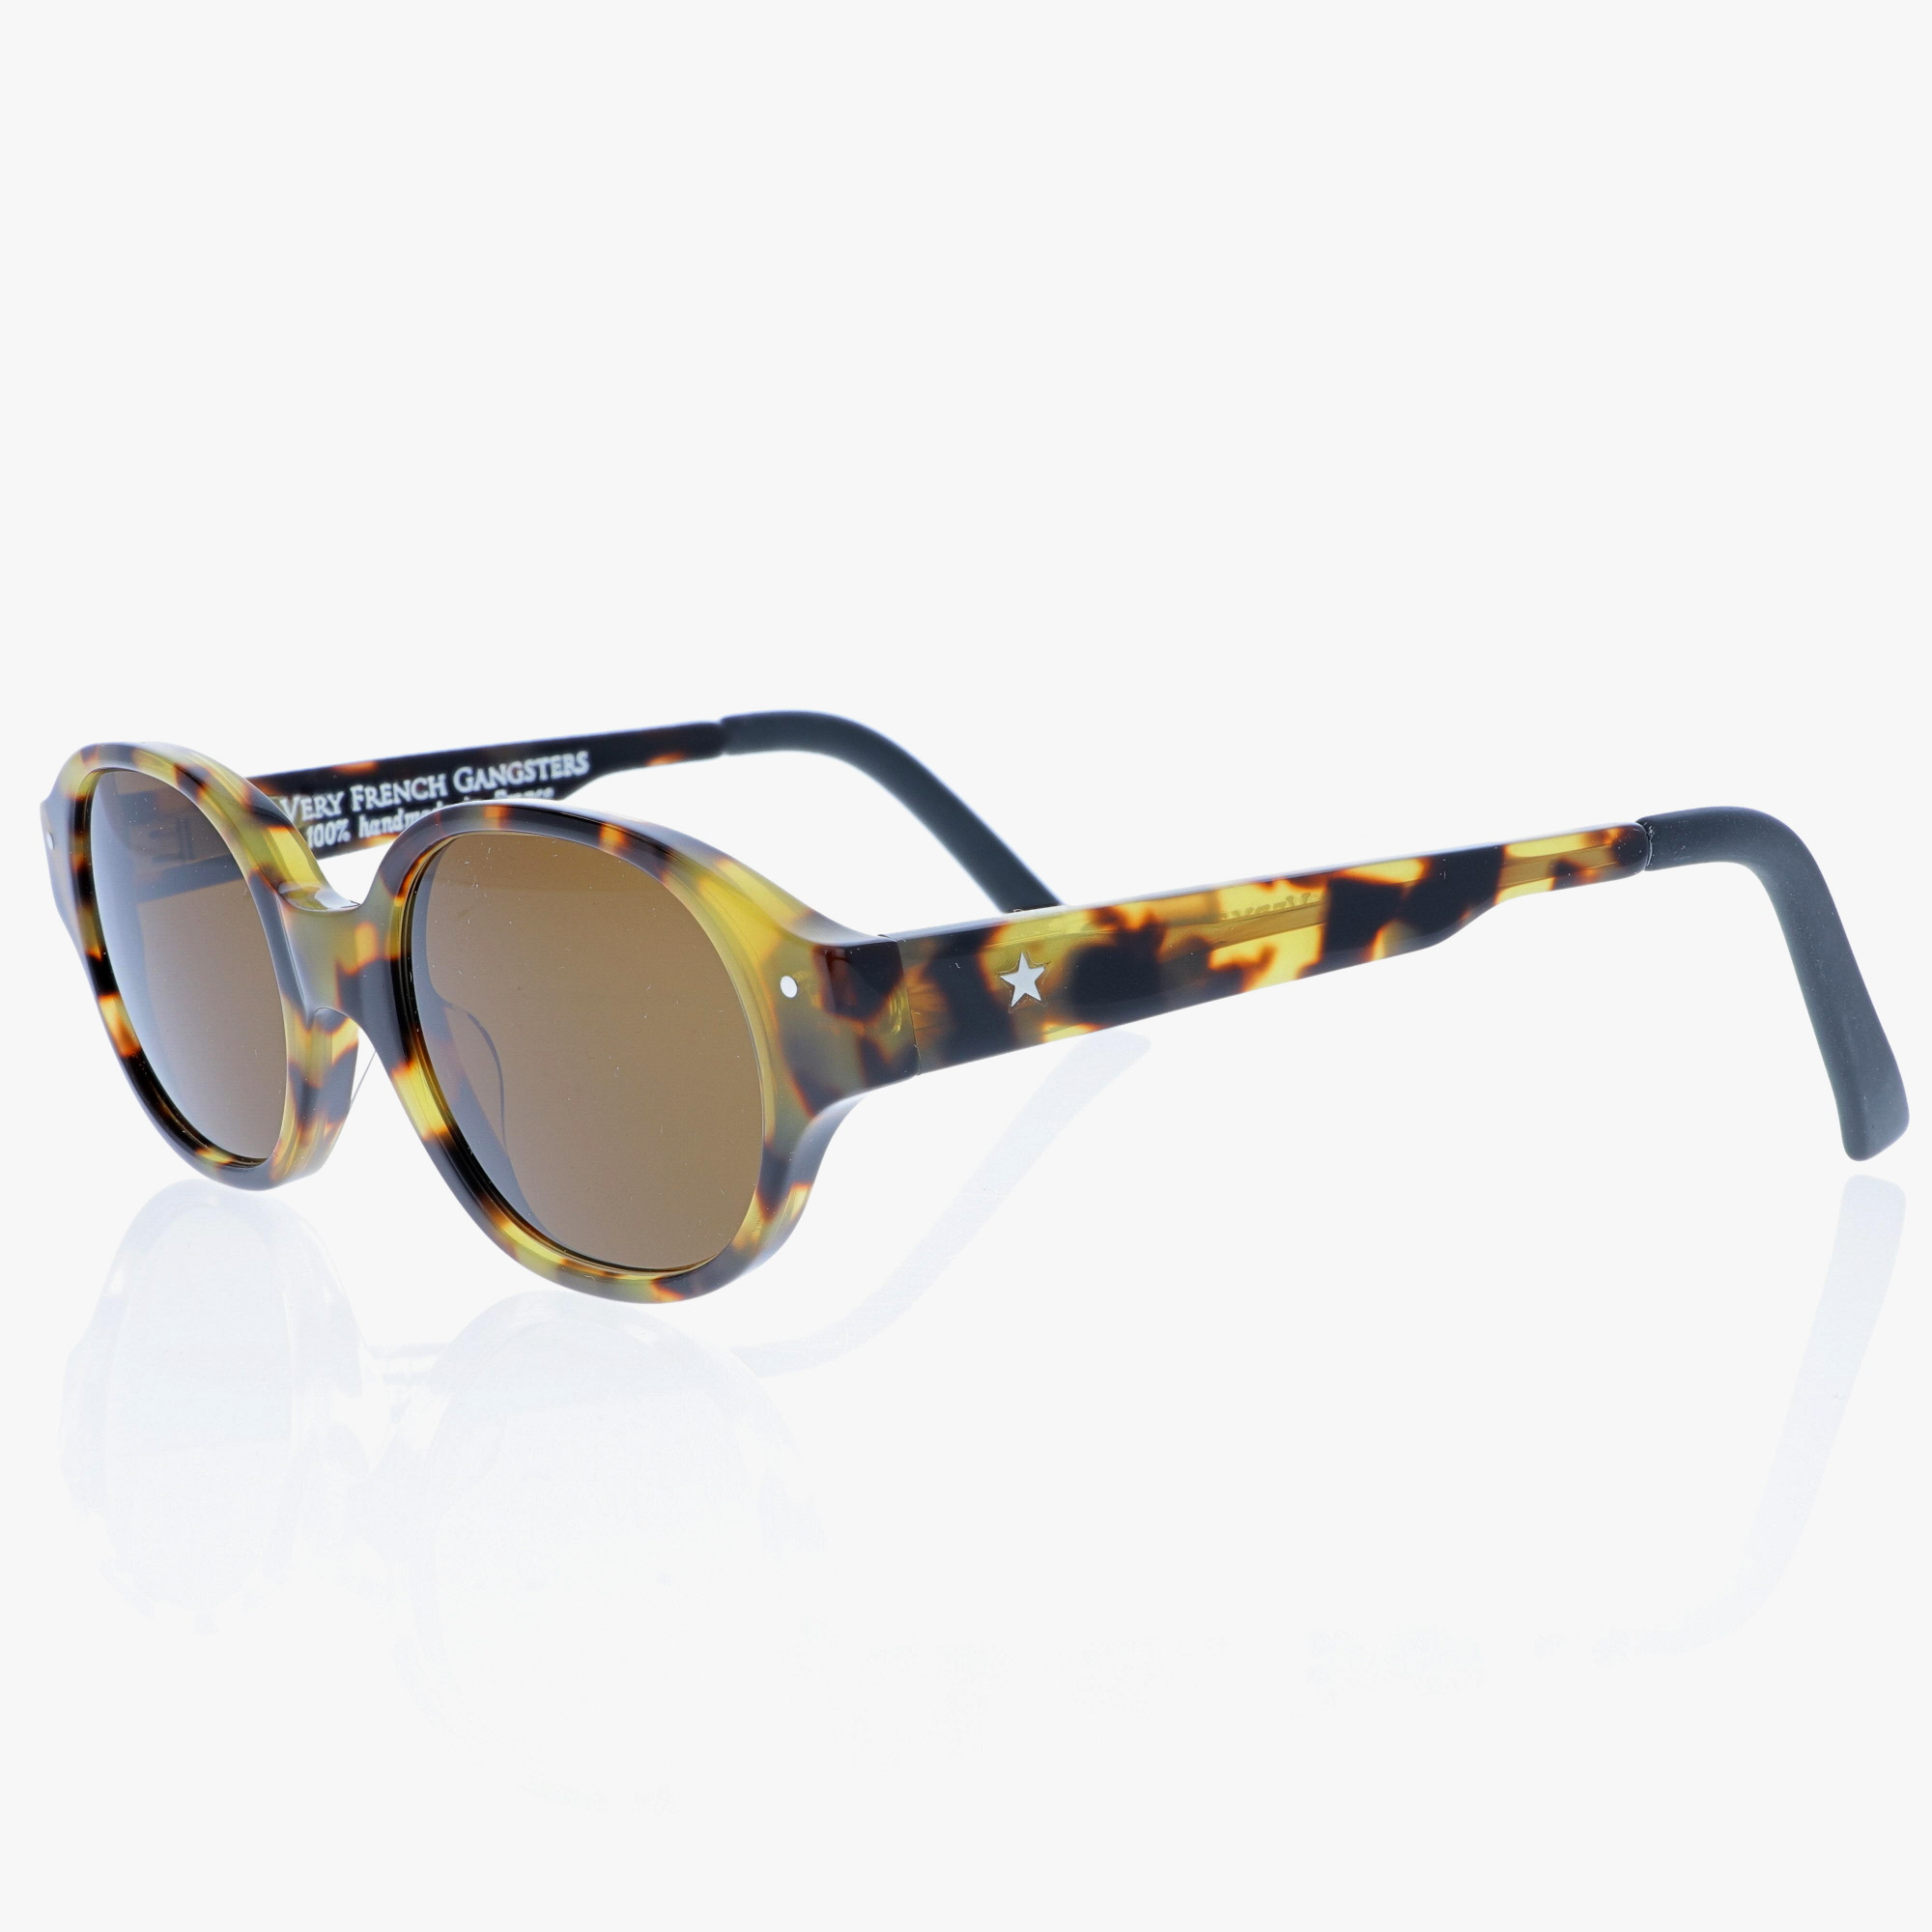 VERY FRENCH GANGSTERS / TWIST SUN / TORTOISE SHELL